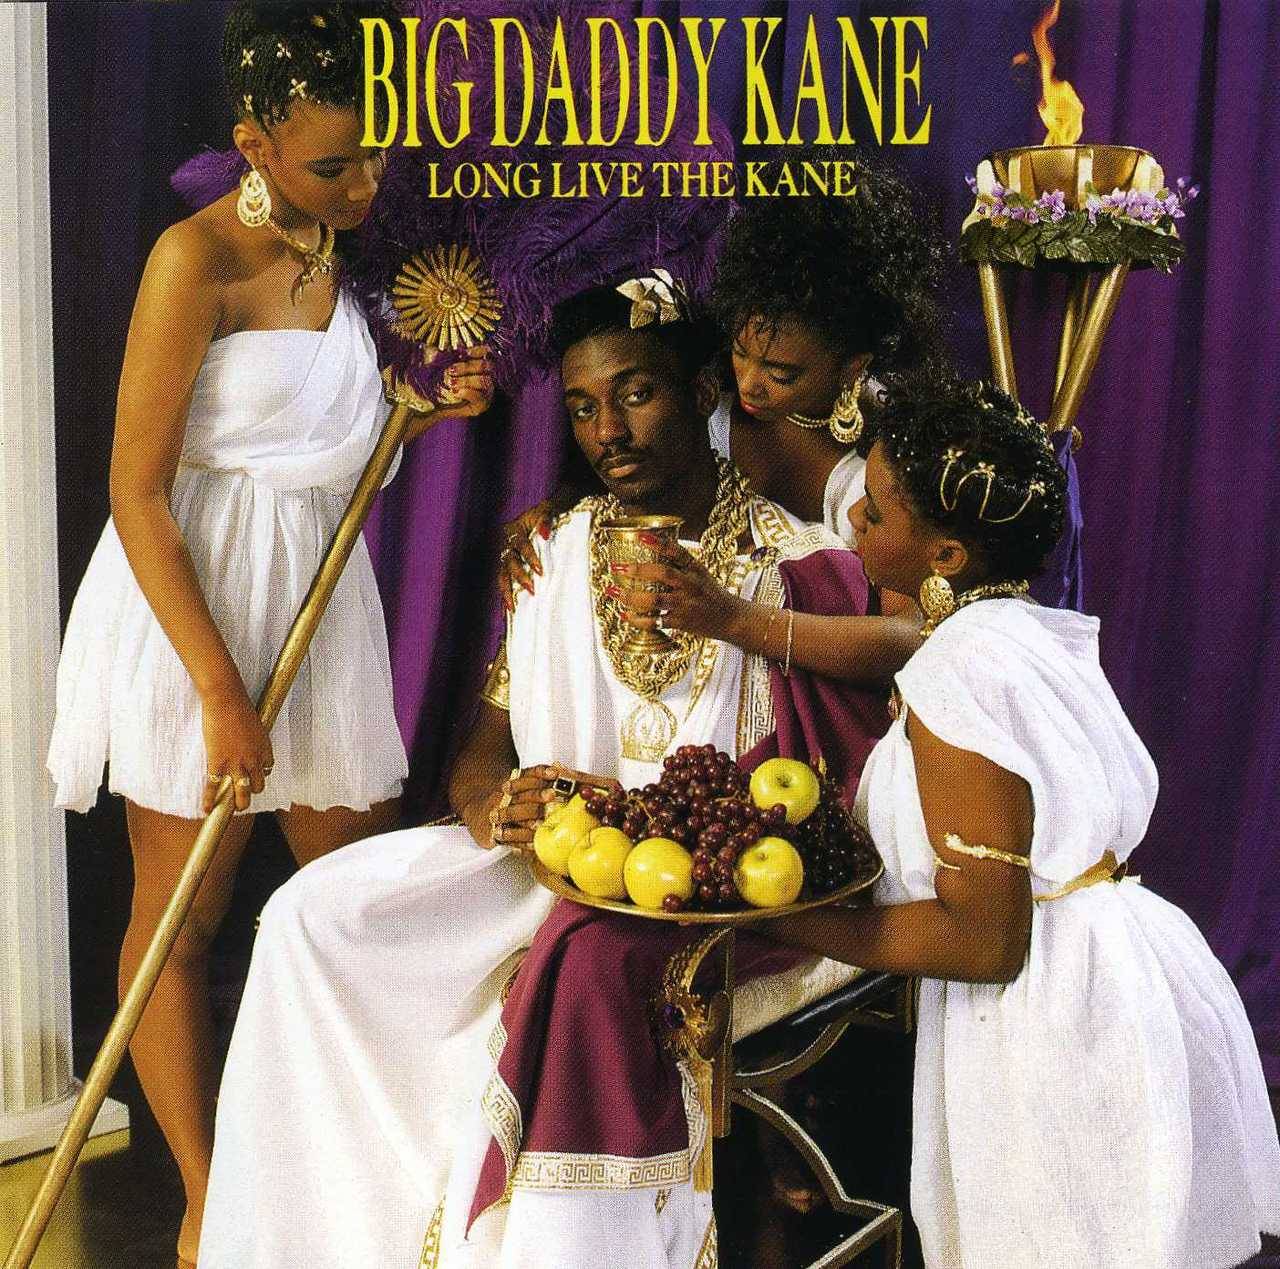 25 YEARS AGO TODAY |6/21/88| Big Daddy Kane released his debut album, Long Live The